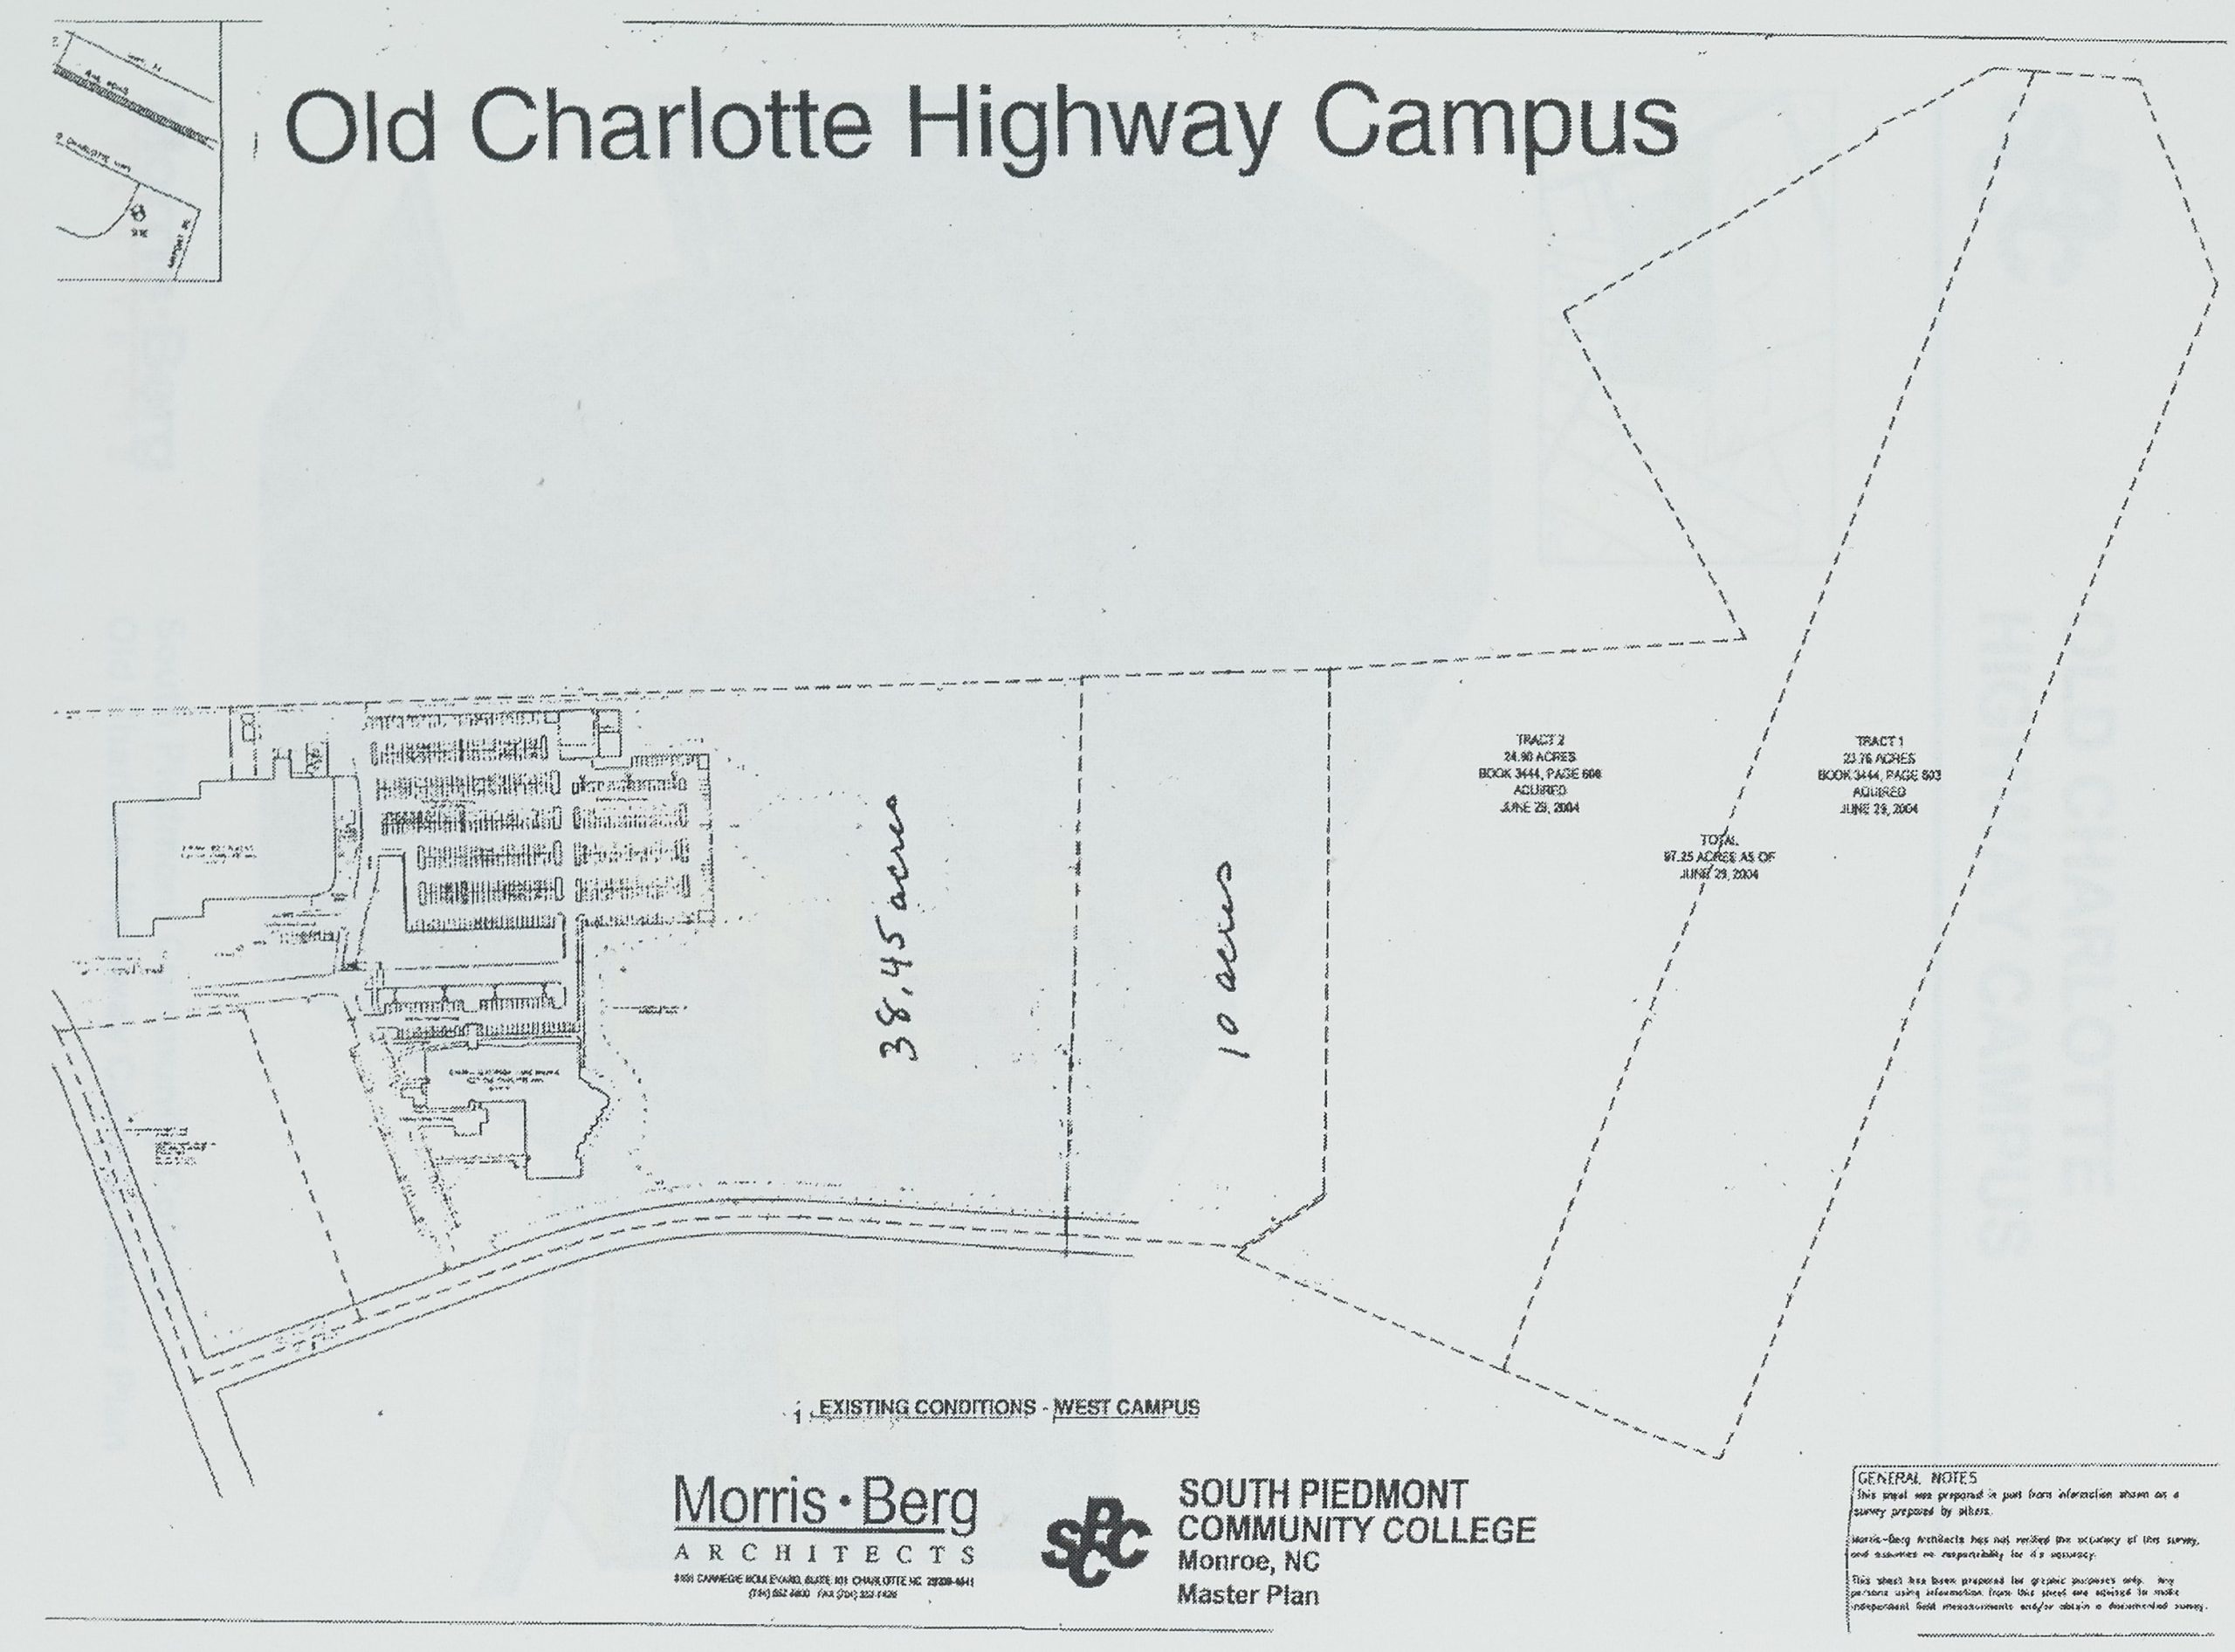 Plan for the Old Charlotte Highway Campus for SPCC. The image shows plots of lands with a planned building on the left side. The plans were created by Morris Berg Architects.